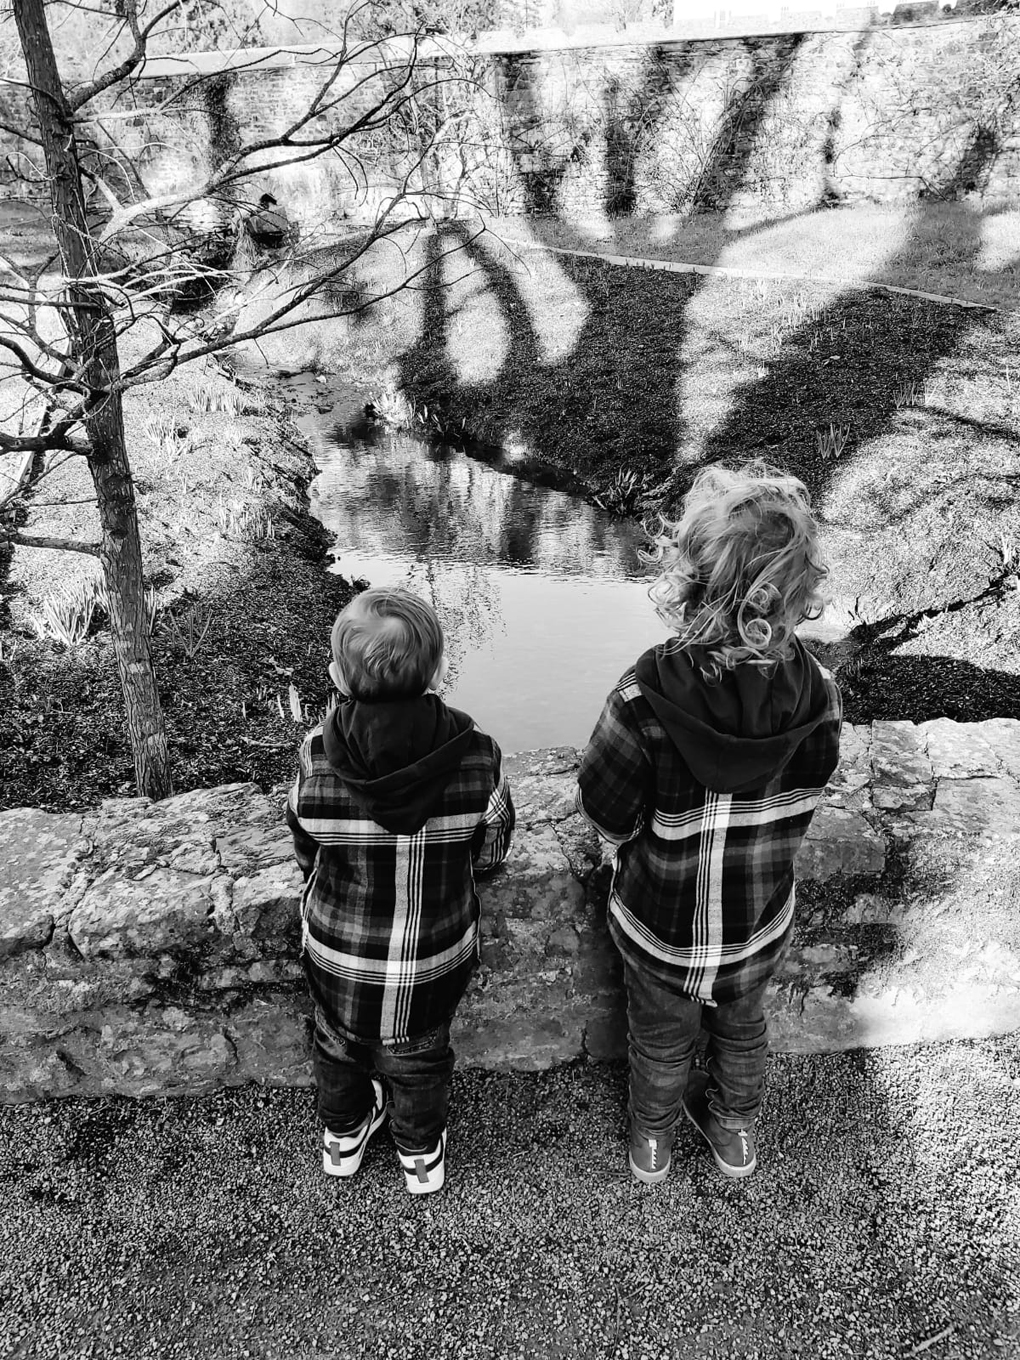 On an excursion round a lovely old garden my two grandsons stopped on a low stone bridge to look at water gushing out of the opposite taller wall forming a meandering stream flanked by shallow banks bedecked by long eerie shadows made by the trees in the sunshine.